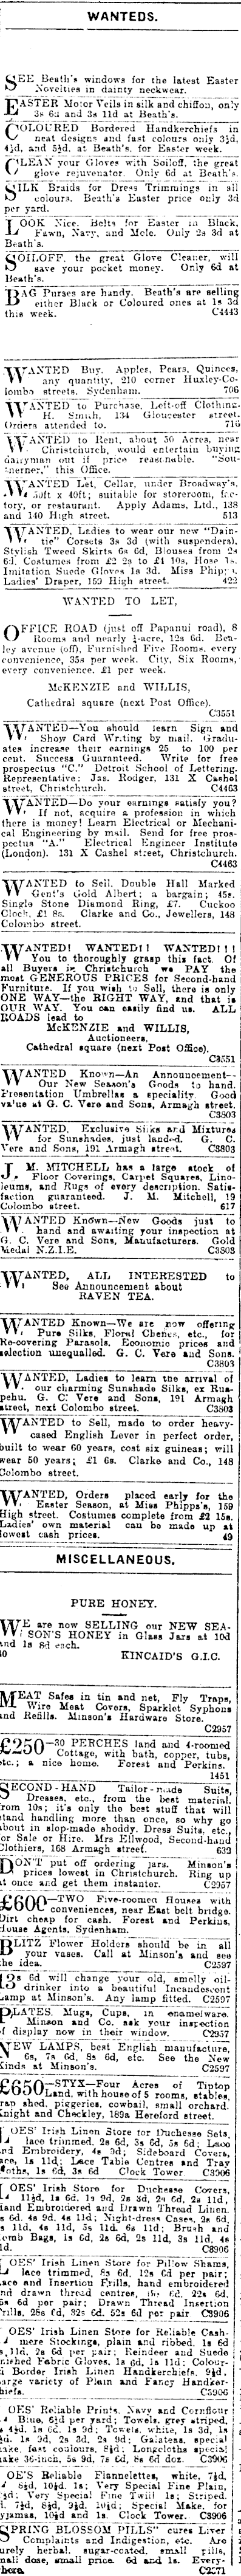 Papers Past Newspapers Press 12 April 1909 Page 10 Advertisements Column 4